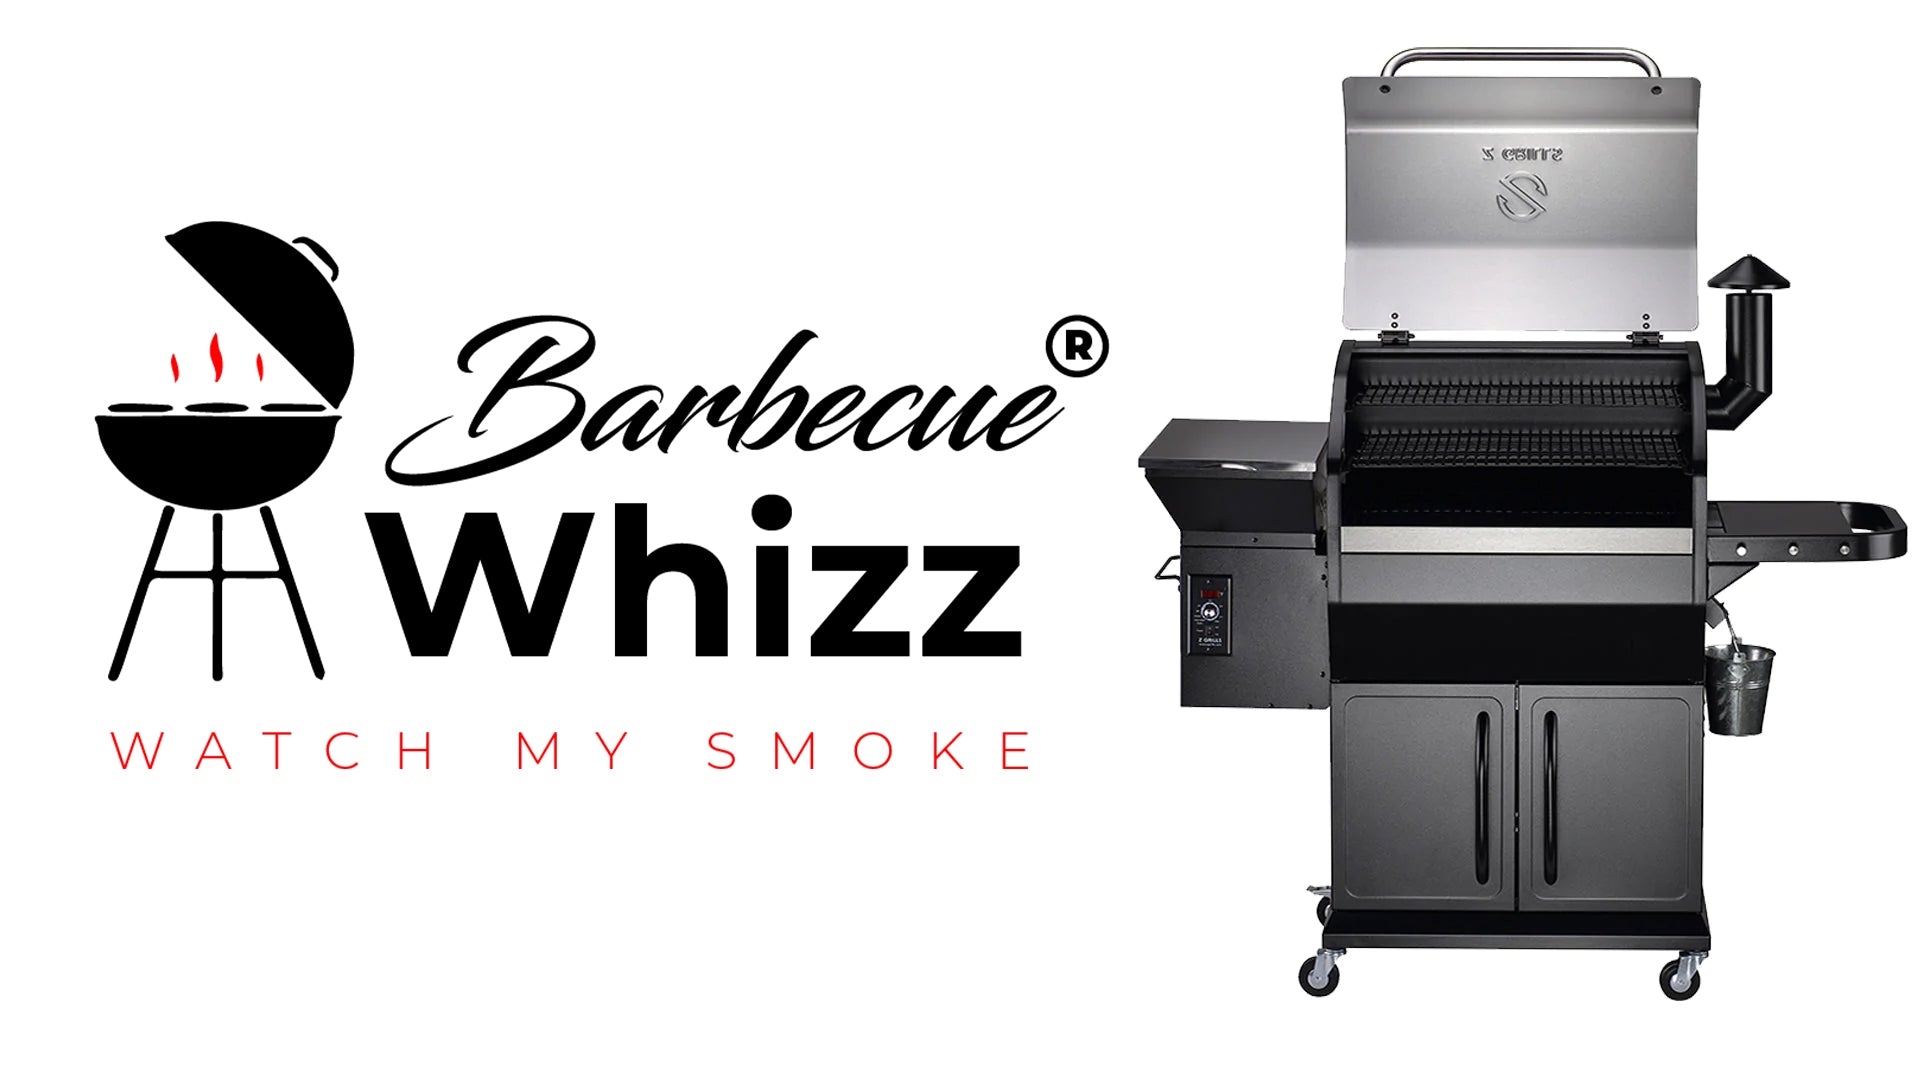 Discover How Barbecue Whizz…Watch your Smoke Is Shaking Up the Grilling Products Scene